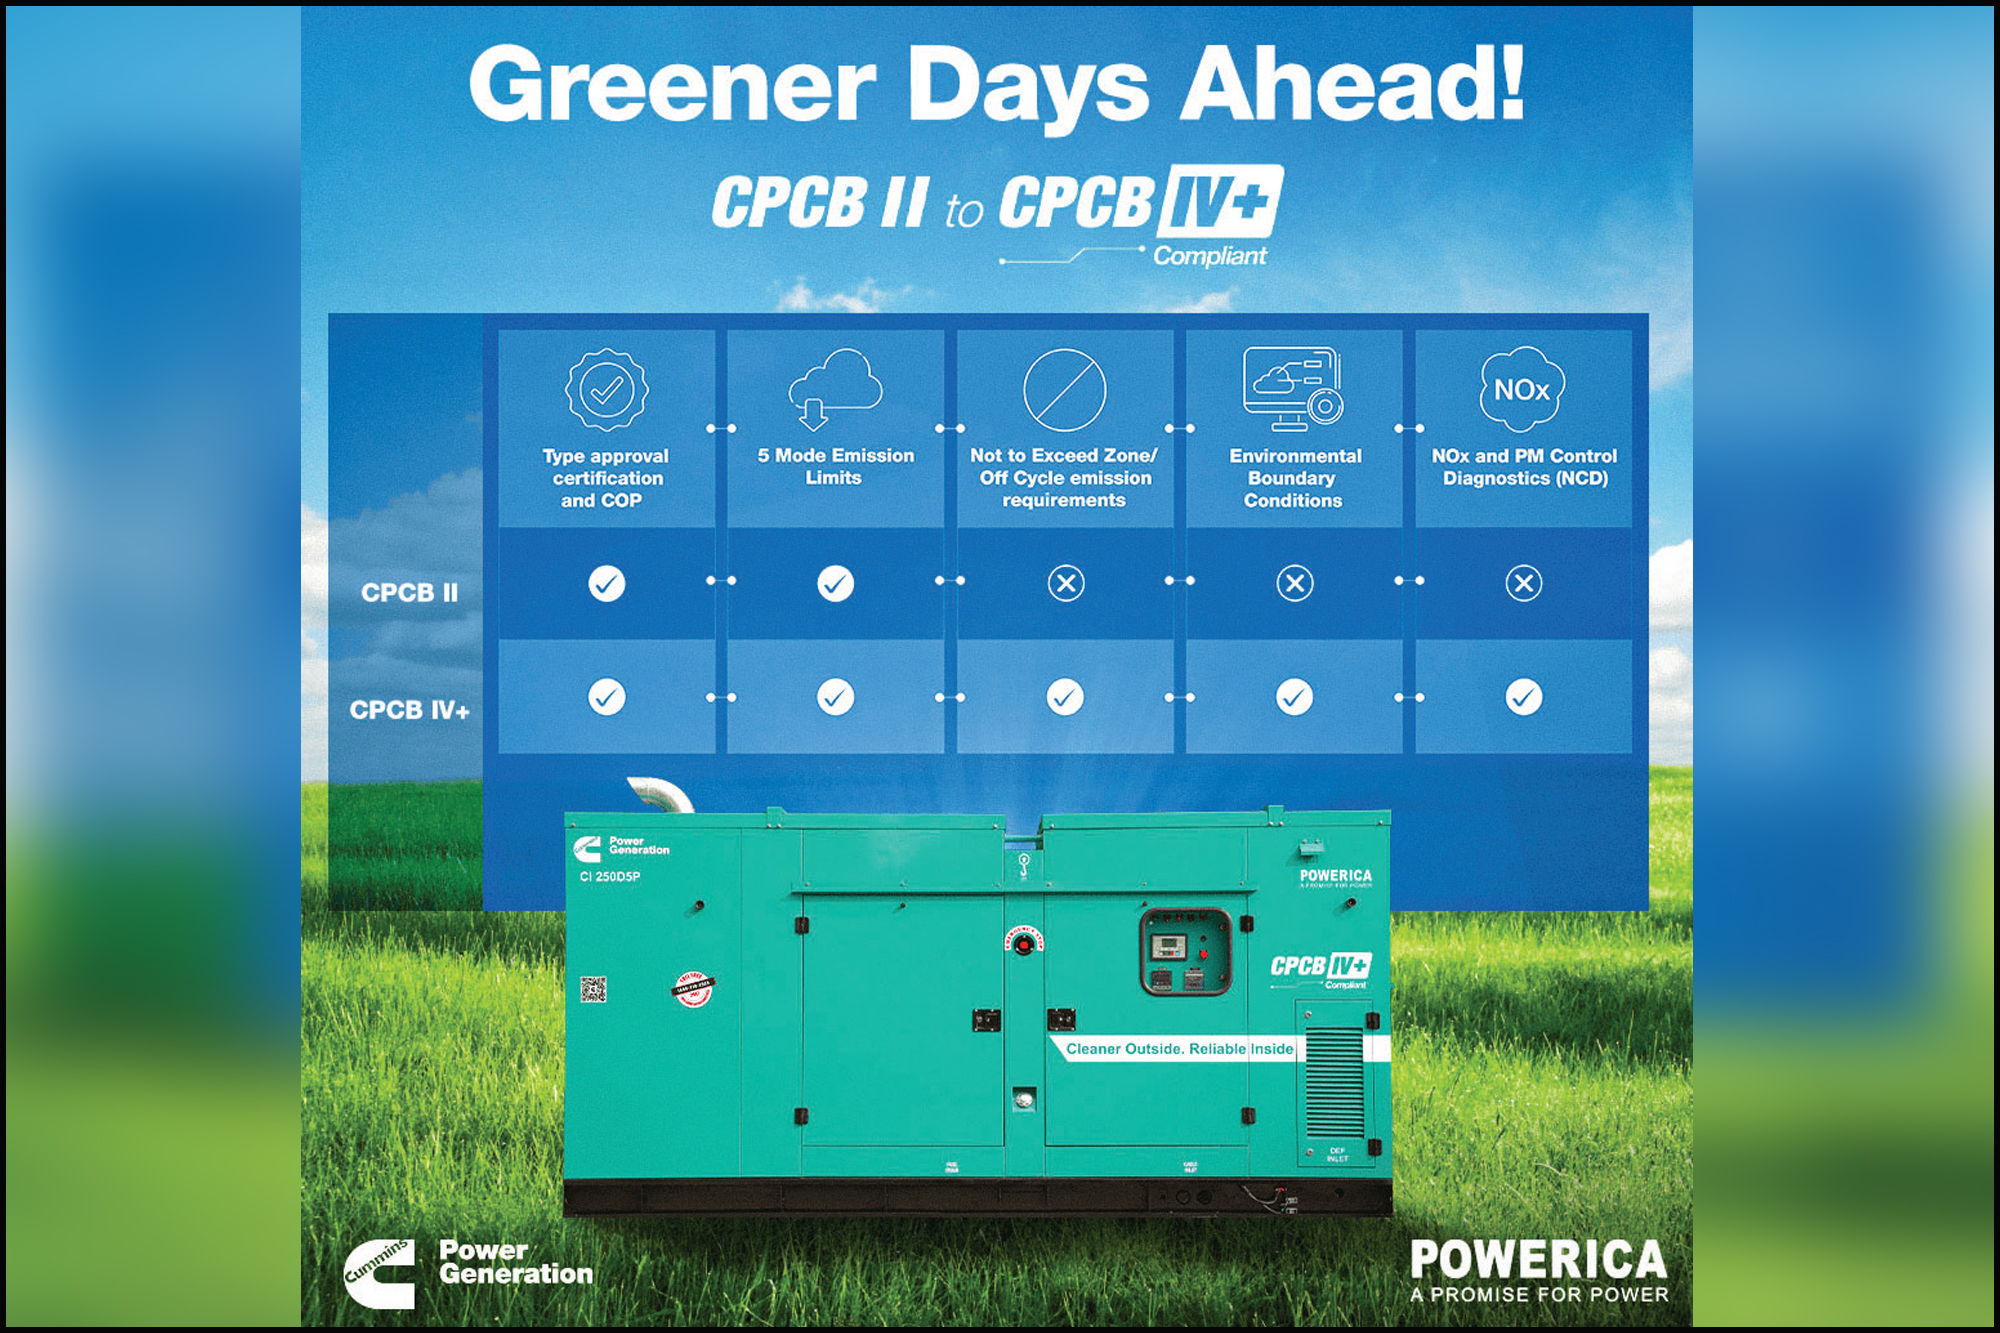 Cummins Powerica introduces CPCB IV+ compliant gensets